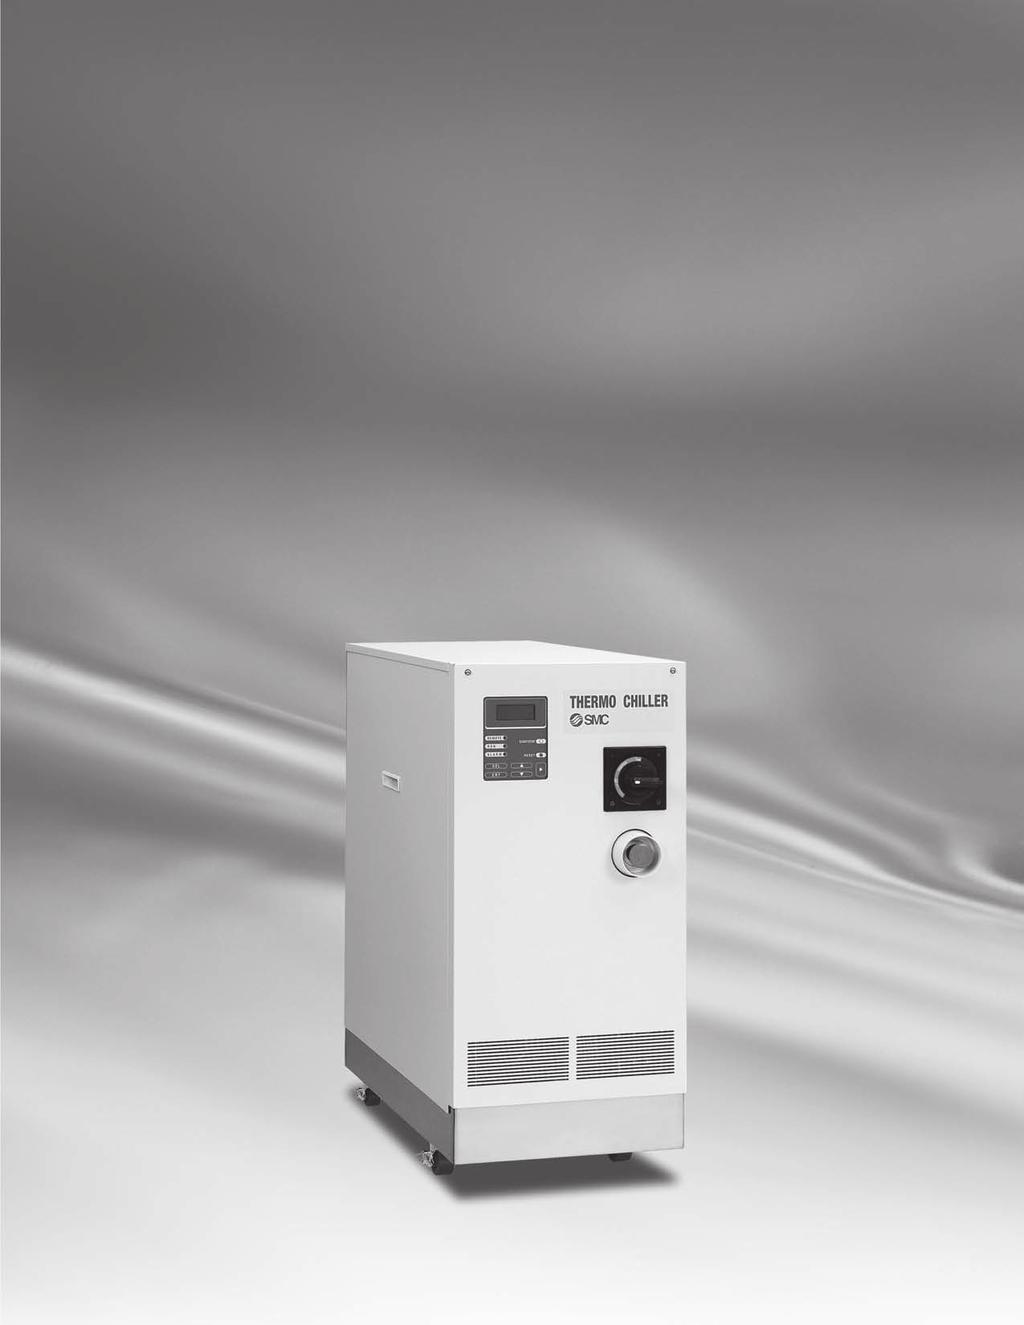 Circulating Fluid Temperature Controller Water-cooled Thermo-chiller SEMATECH S2-93, S8-95 SEMI Standard S2-73, S8-113, F47-2 Series Refrigerant-free and energy saving type using no compressor.